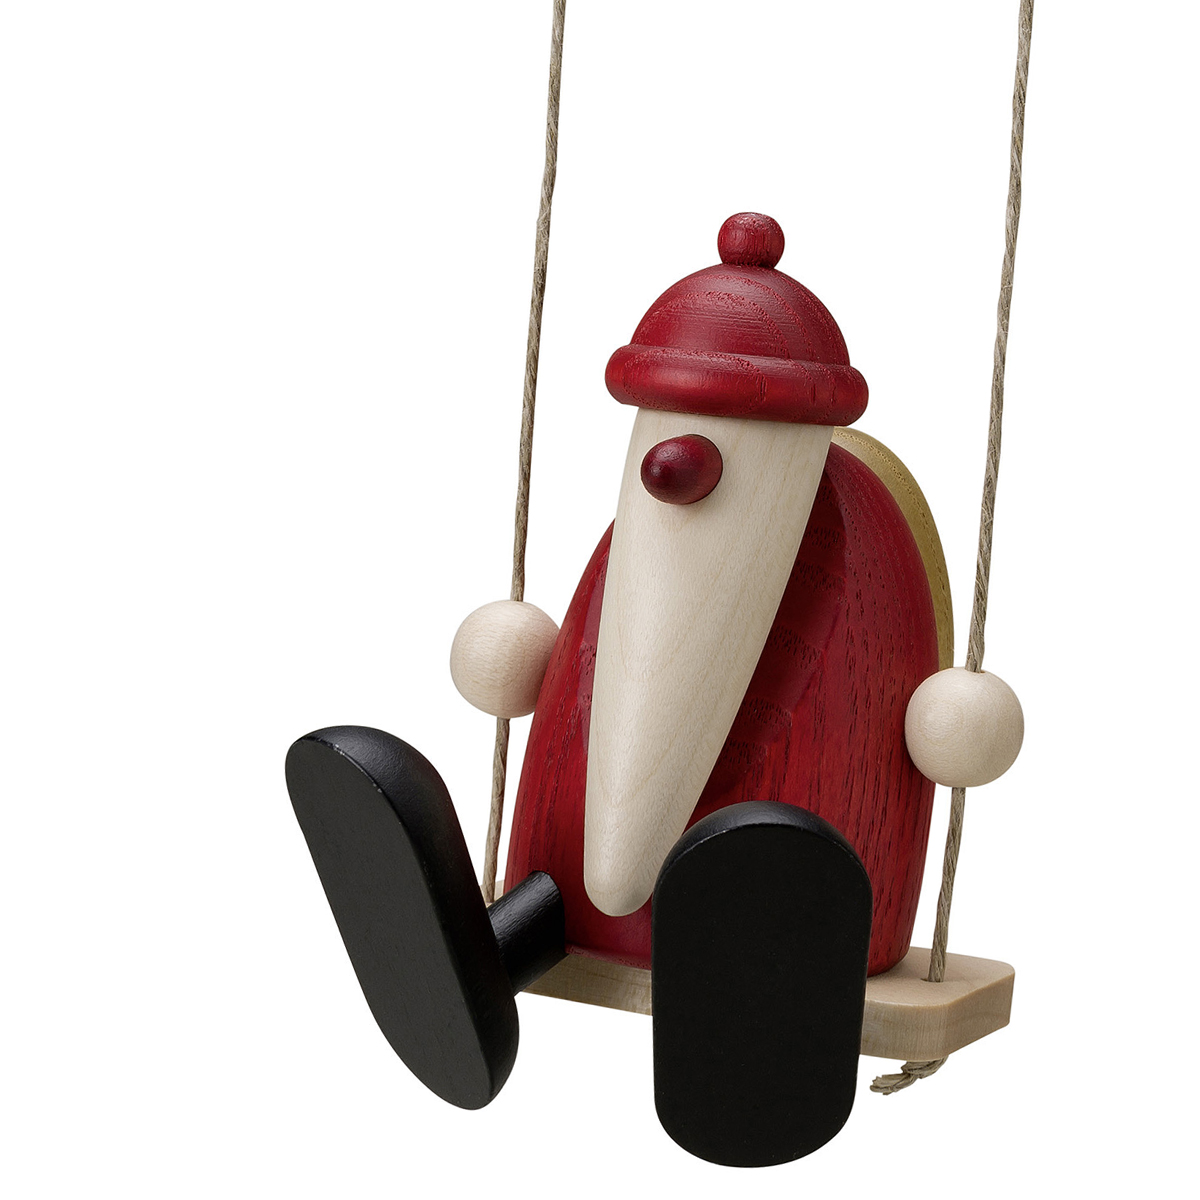 Santa Claus on a swing, small